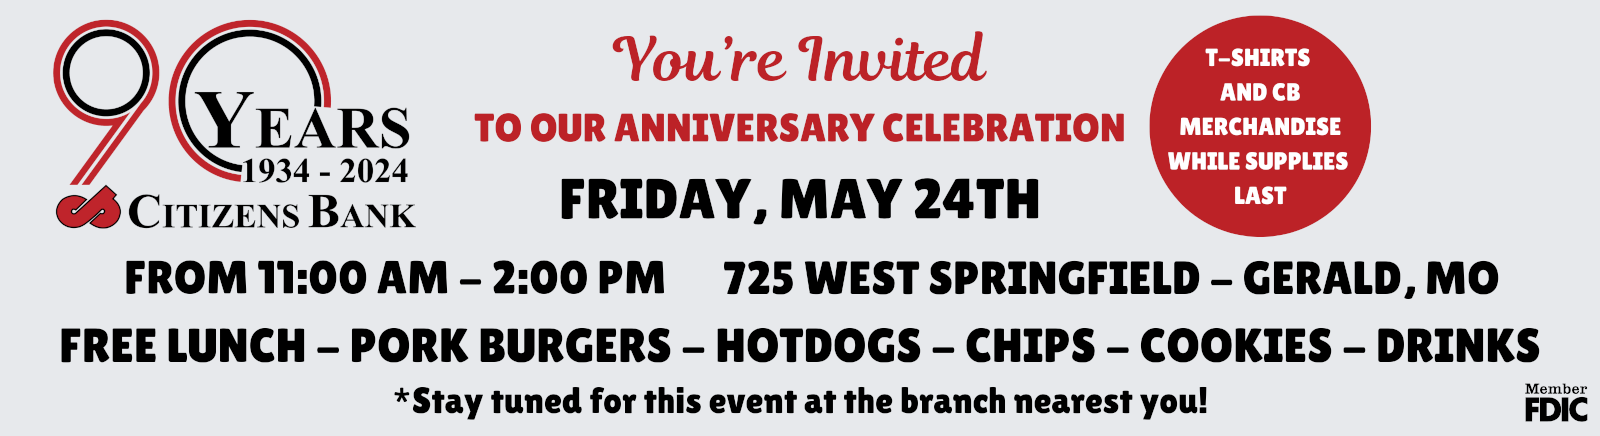 90 YEARS 1934 - 2024 CITIZENS BANK YOU'RE INVITED TO OUR ANNIVERSARY CELEBRATION FRIDAY, MAY 24TH FROM 11AM - 2PM 725 WEST SPRINGFIELD - GERALD, MO FREE LUNCH - PORK BURGERS - HOTDOGS - CHIPS - COOKIES - DRINKS - T-SHIRTS AND CB MERCHANDISE WHILE SUPPLIES LAST *STAY TUNED FOR THIS EVENT AT THE BRANCH NEAREST YOU!